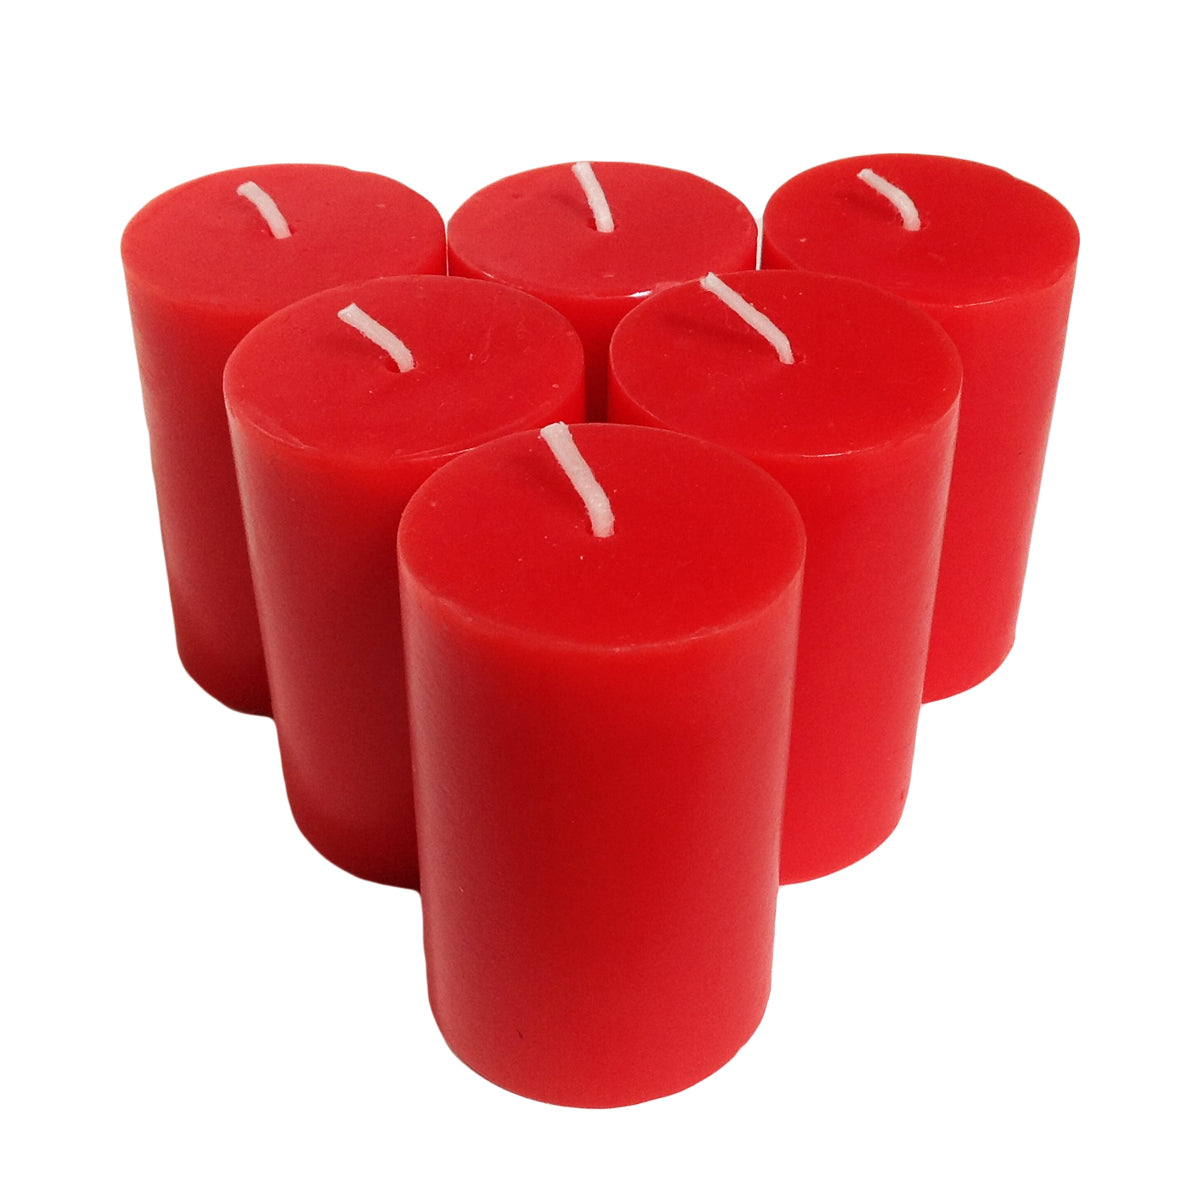 Red Pillar Candles size 7 x 4.3cm - Pack of 6